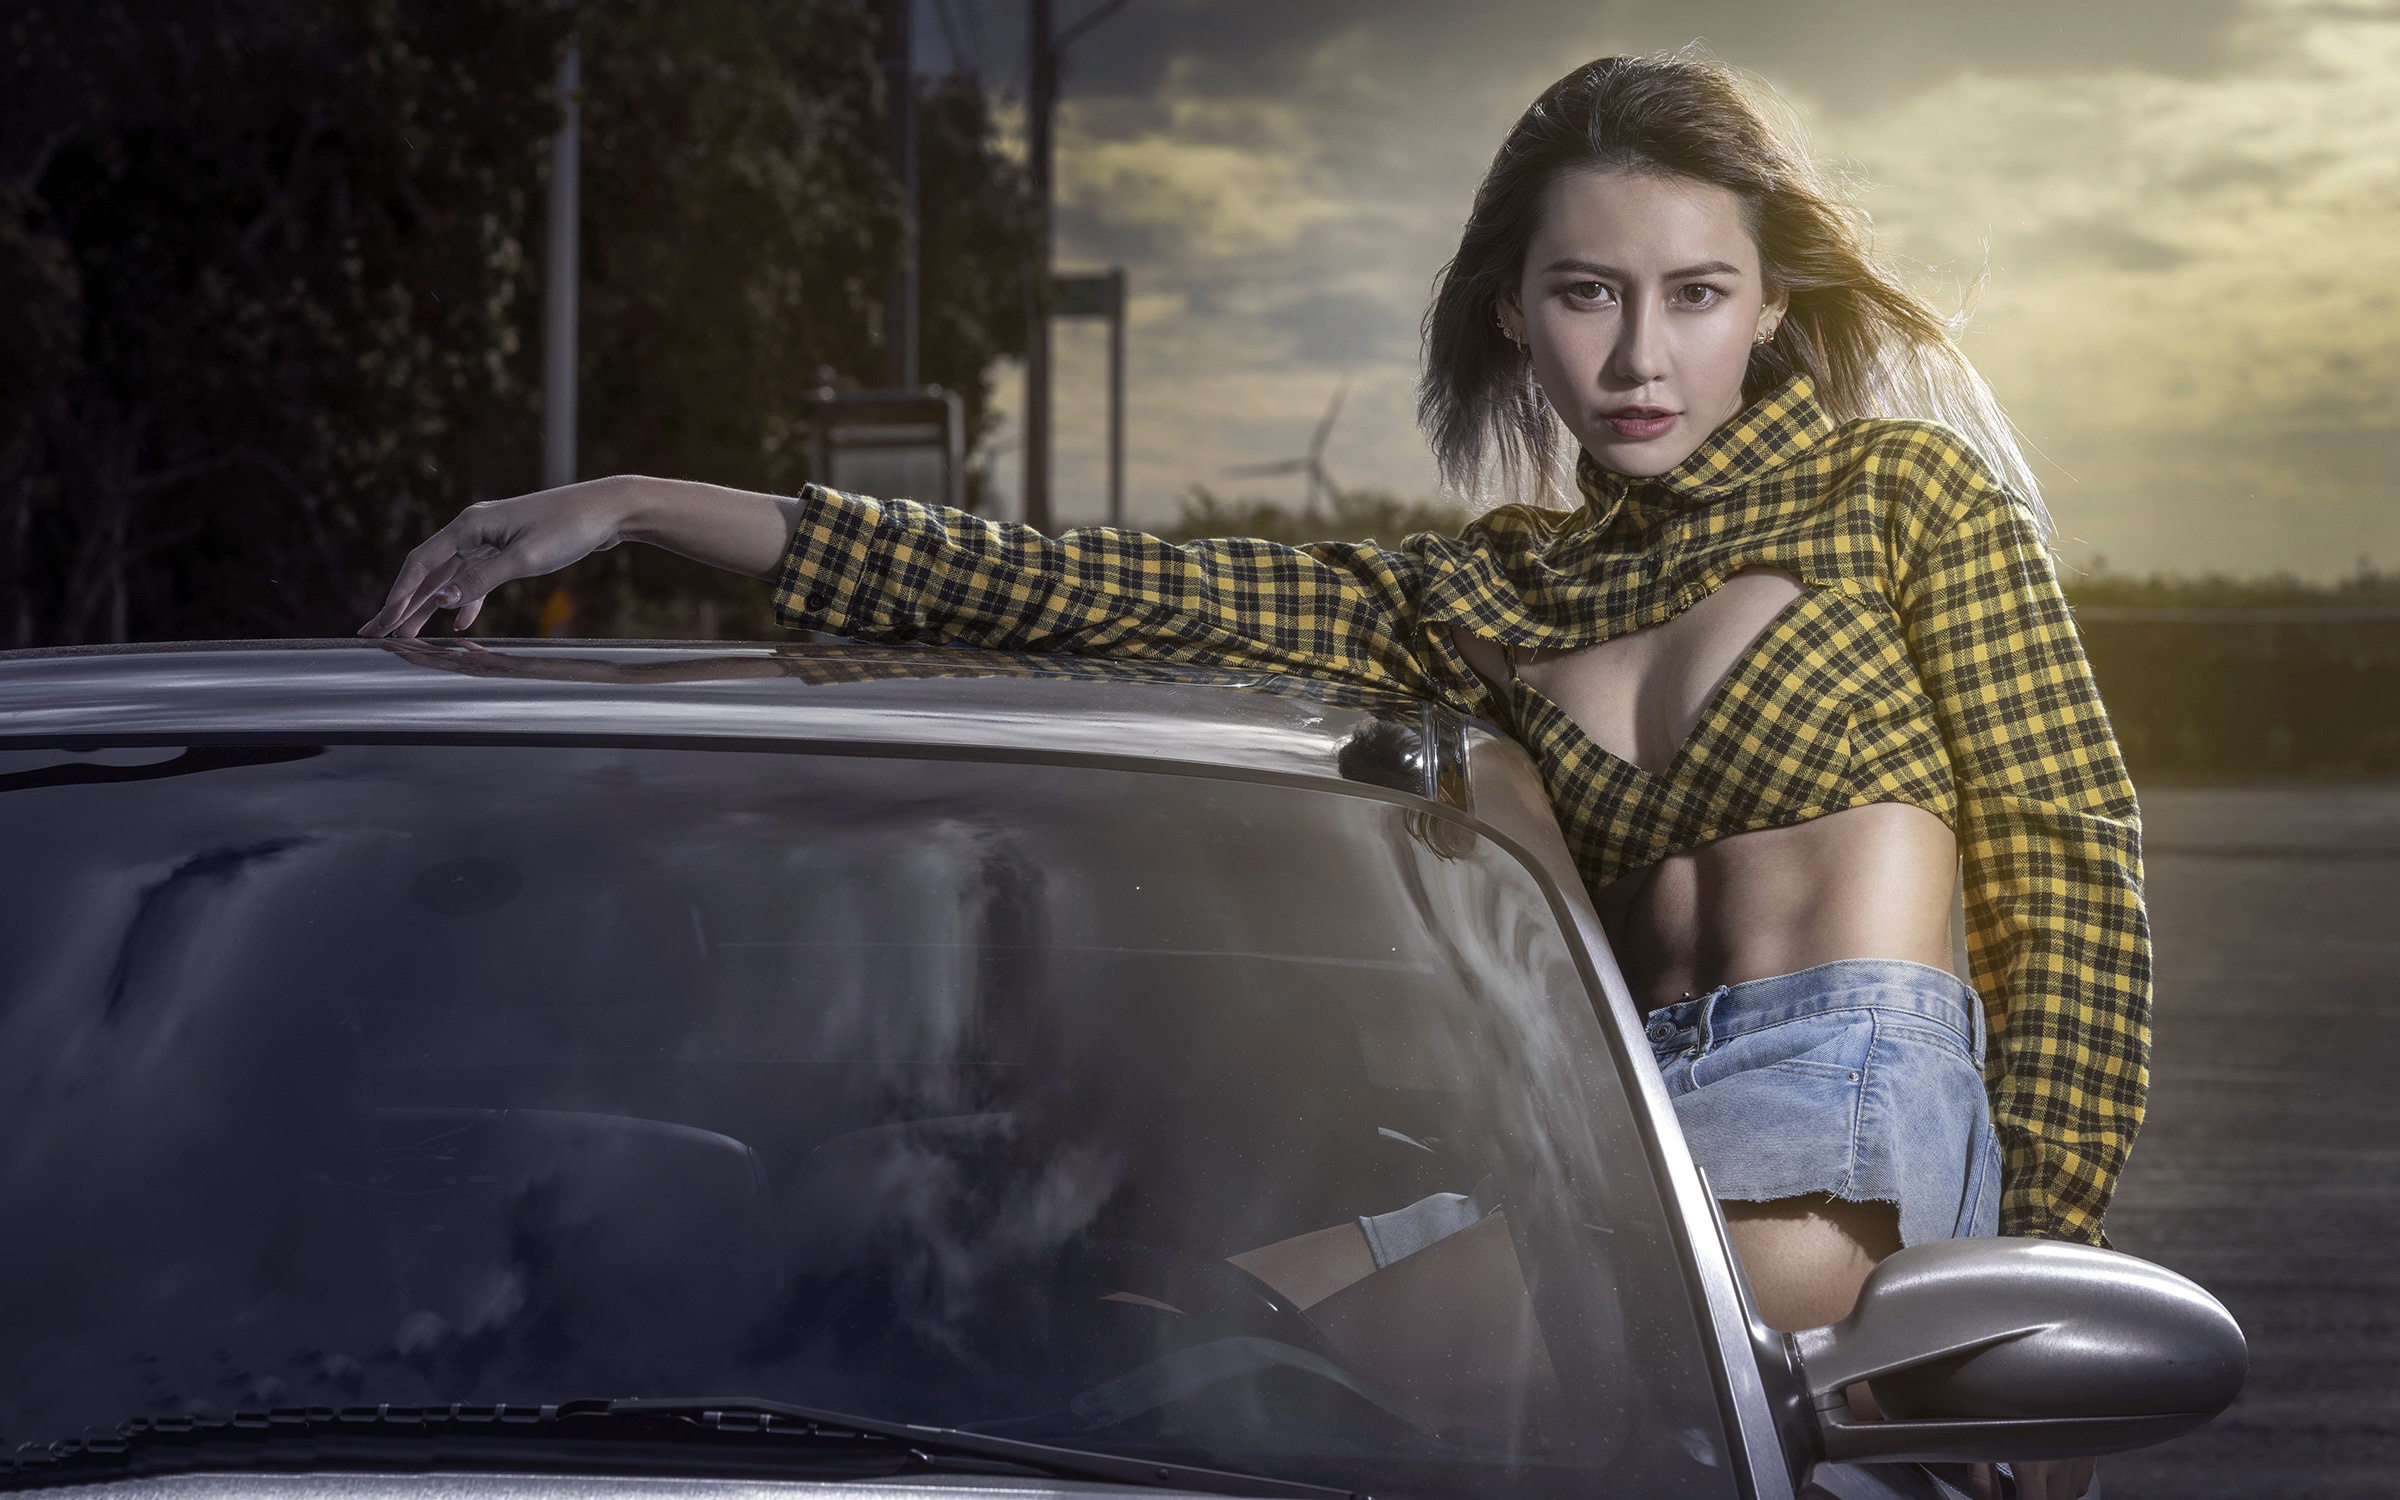 Women Asian Car Vehicle Women With Cars Model Looking At Viewer Plaid Clothing 2400x1500